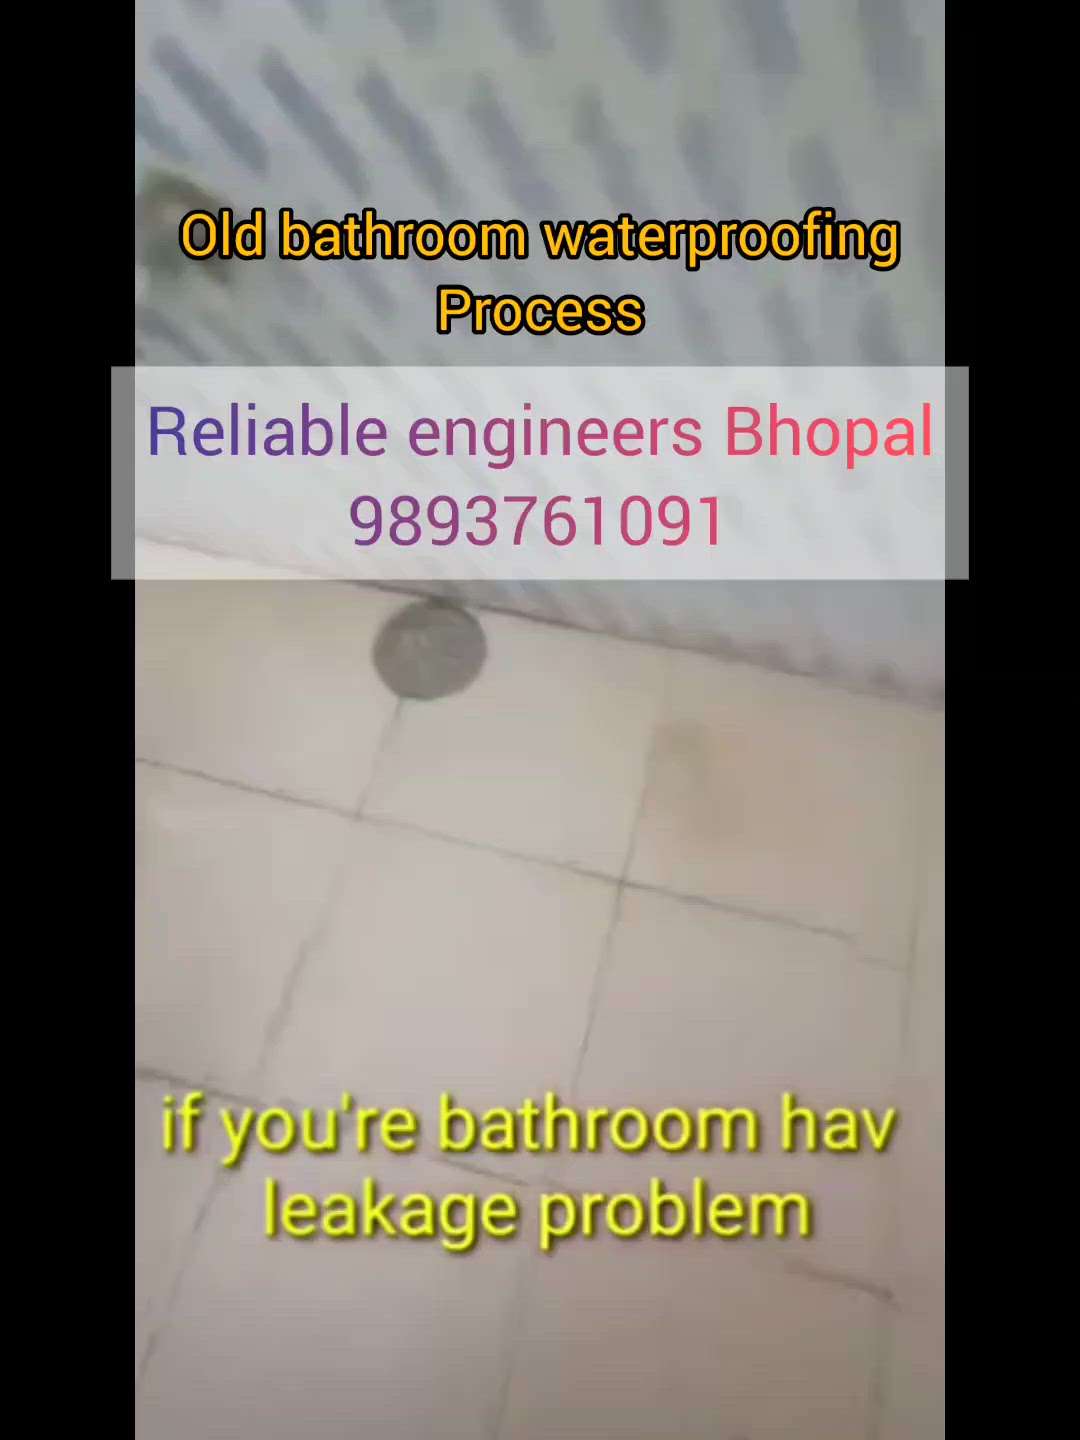 Reliable engineers Bhopal old bathroom waterproofing in Bhopal and bathroom 4fit wall dampness repair  #WaterProofings   #WaterProofing  #BathroomDesigns  #bathroomwaterproofing  #BathroomRenovation  #BathroomIdeas  #BathroomTIles  #BathroomDesigns  #MixedRoofHouse  #ParapetRoof  #terracewaterproofing  #BalconyGarden  #WaterSafety  #bhopalduplex  #bhopalbuilder  #bhopalcommercial  #drfixedrooftopwaterprooing  #drfixit  #drfixedrooftopwaterprooing  #FlooringTiles  #VinylFlooring  #FlooringServices  #epoxycoating  #epoxyfloring  #WallPutty  #wallwaterproofing  #Architect  #architecturedesigns  #InteriorDesigner  #ElevationHome  #HomeDecor  #disining  #CivilEngineer  #engineers  #engineeringlife  #Contractor  #commercialproperty  #FlatRoof  #WoodenFlooring  #bhopal  #bhopalinteriors